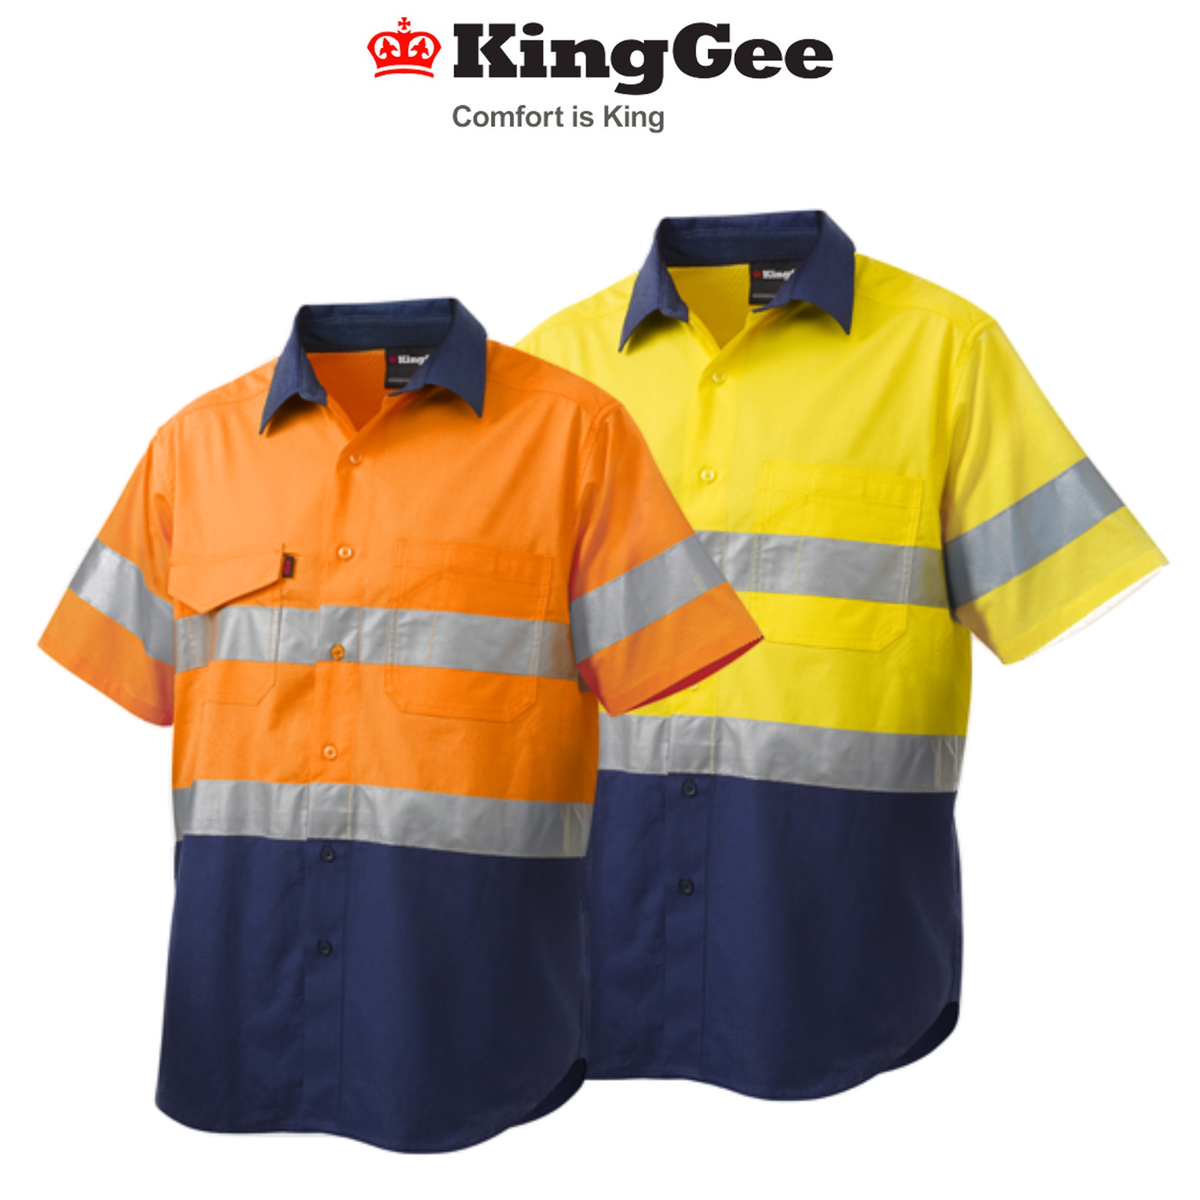 Collins Clothing Co - Workwear, Boots, High Visibility Safety Clothing